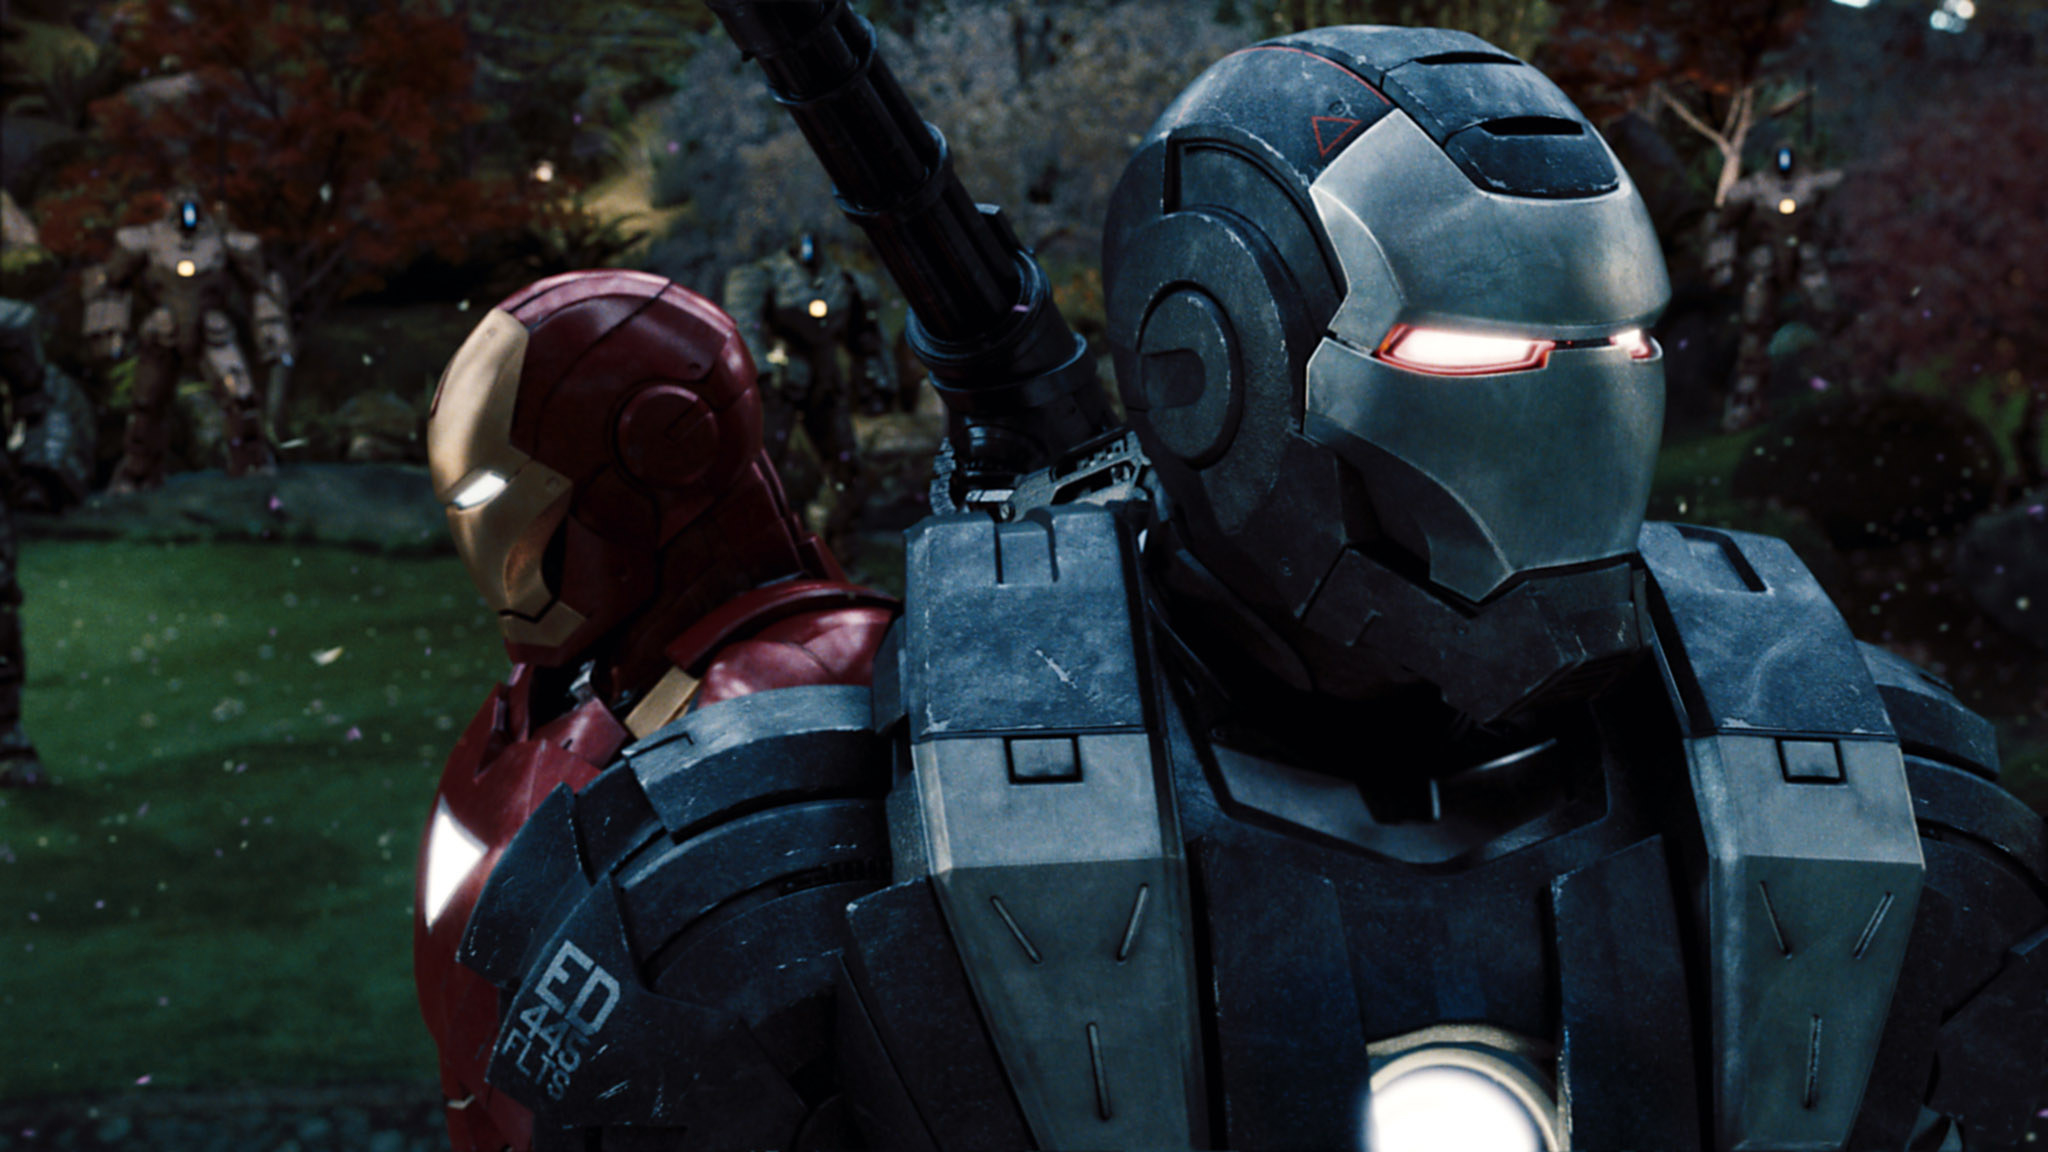 The War Machine-Iron Man battle vs the Drones is still one of the most  badass scenes from the MCU : r/marvelstudios